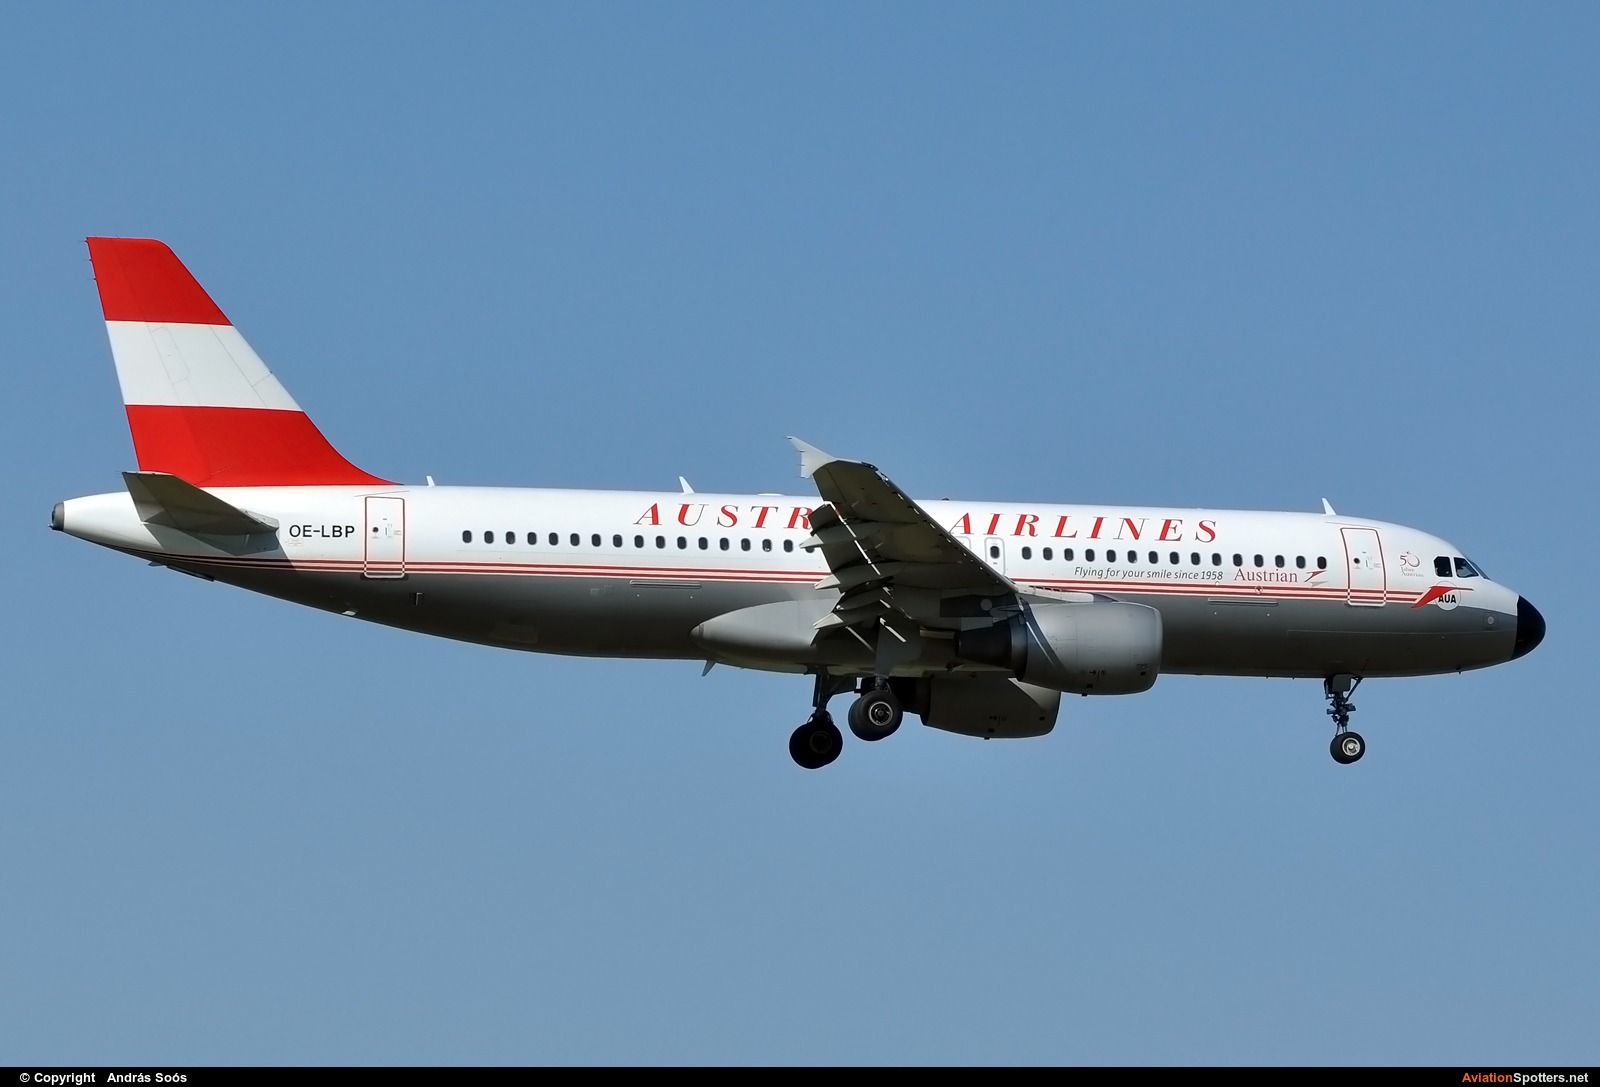 Austrian Airlines  -  A320  (OE-LBP) By András Soós (sas1965)